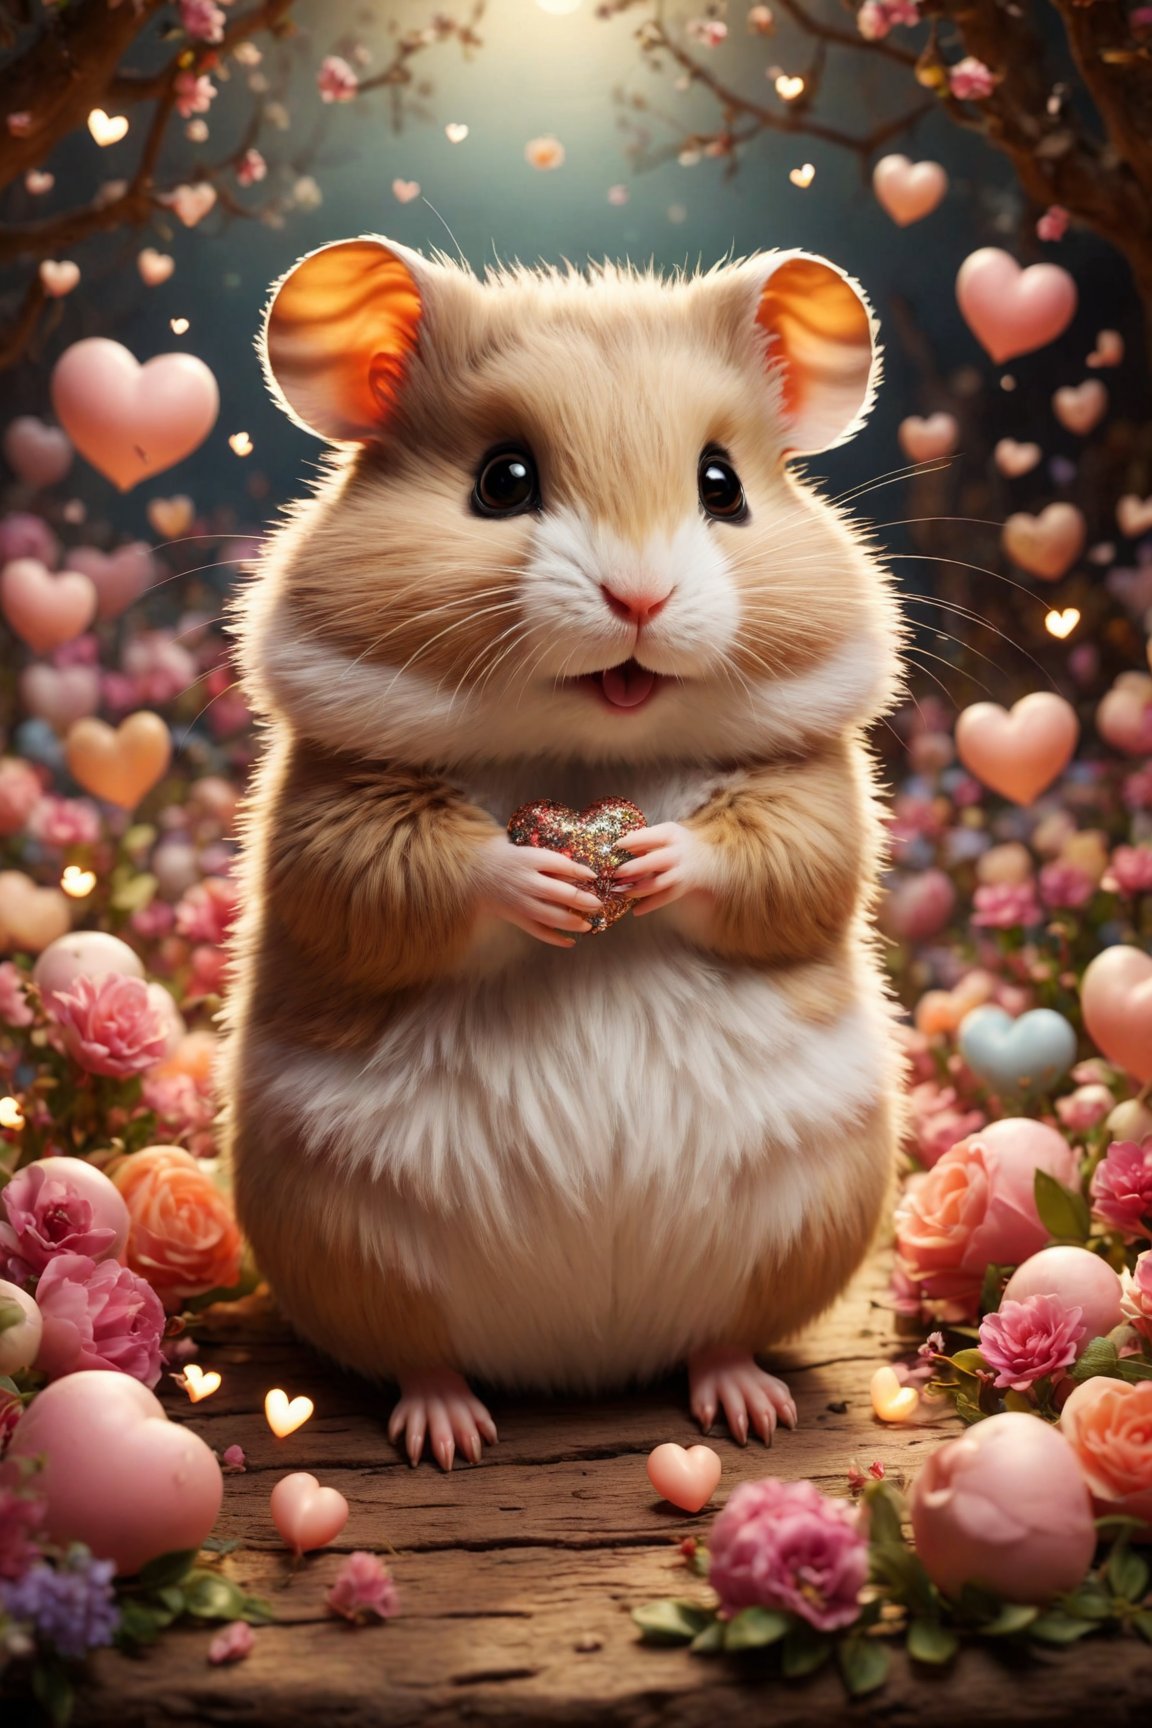 Illustrate a whimsical and adorable scene featuring a cute lovable hamster in the throes of love, surrounded by a plethora of charming hearts. The hamster, with its fluffy fur and endearing whiskers, gazes affectionately at a heart-shaped object, its tiny paws reaching out in a gesture of adoration. The hearts, varying in size and color, float around the hamster in a delightful, swirling dance, infusing the scene with a sense of joy and romance. Each heart pulsates with a warm, radiant glow, casting a soft, rosy light upon the furry protagonist. The whimsical ambiance is further enhanced by the presence of delicate, pastel-hued flowers blooming in the background, adding a touch of enchantment to the enchanting tableau.